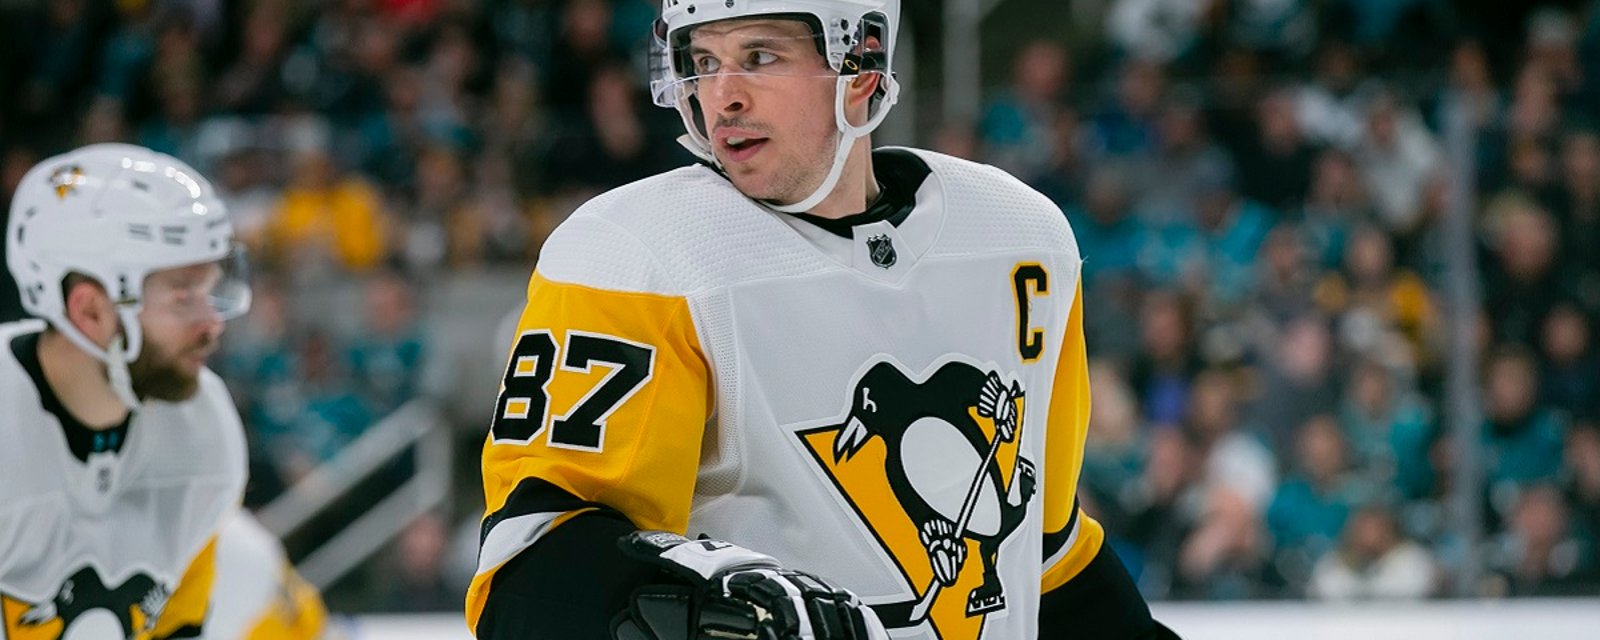 Breaking: Sidney Crosby has just surpassed one of Mario Lemieux's records.